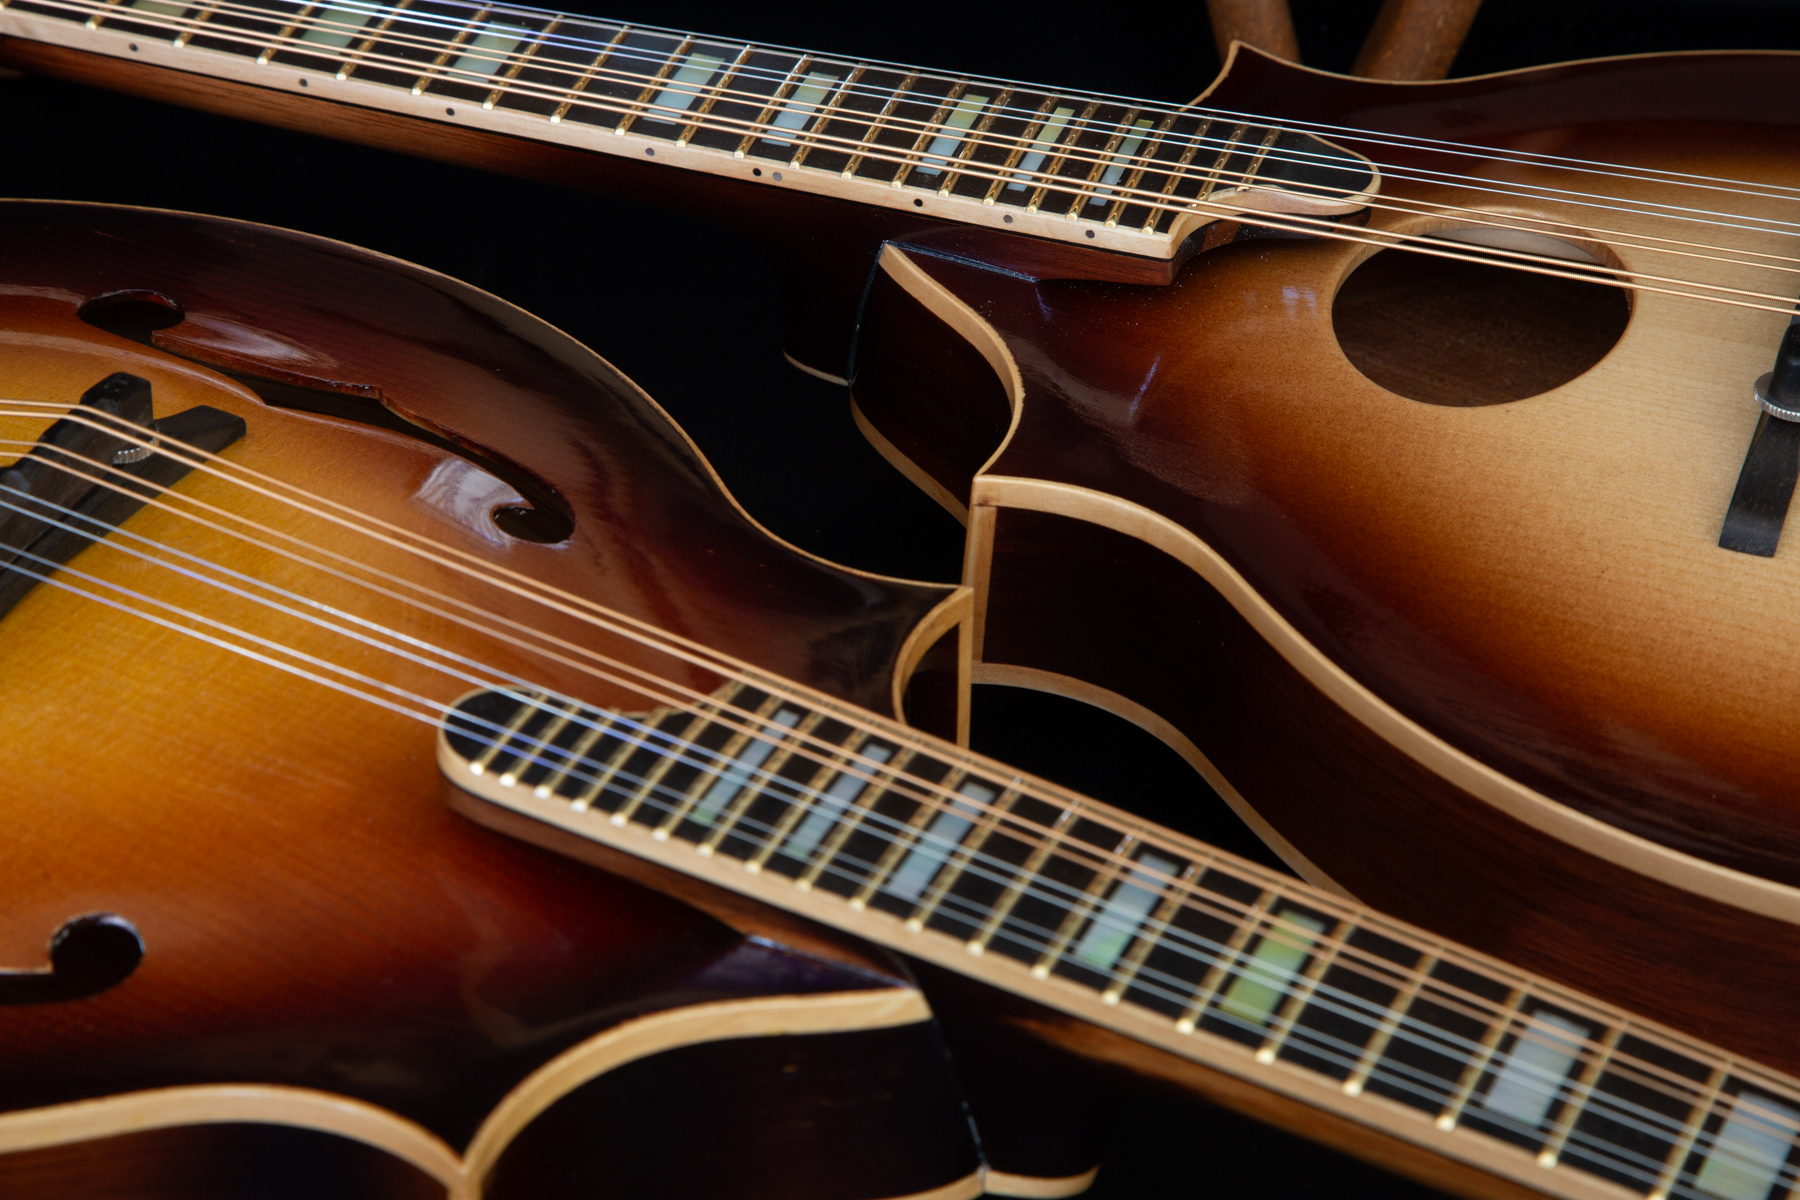 Luthier Lachlan MacLennan located in Tasmania will be featuring customer mandolins with the Elm & the Raven as part of the Huon Valley Studio Trail.